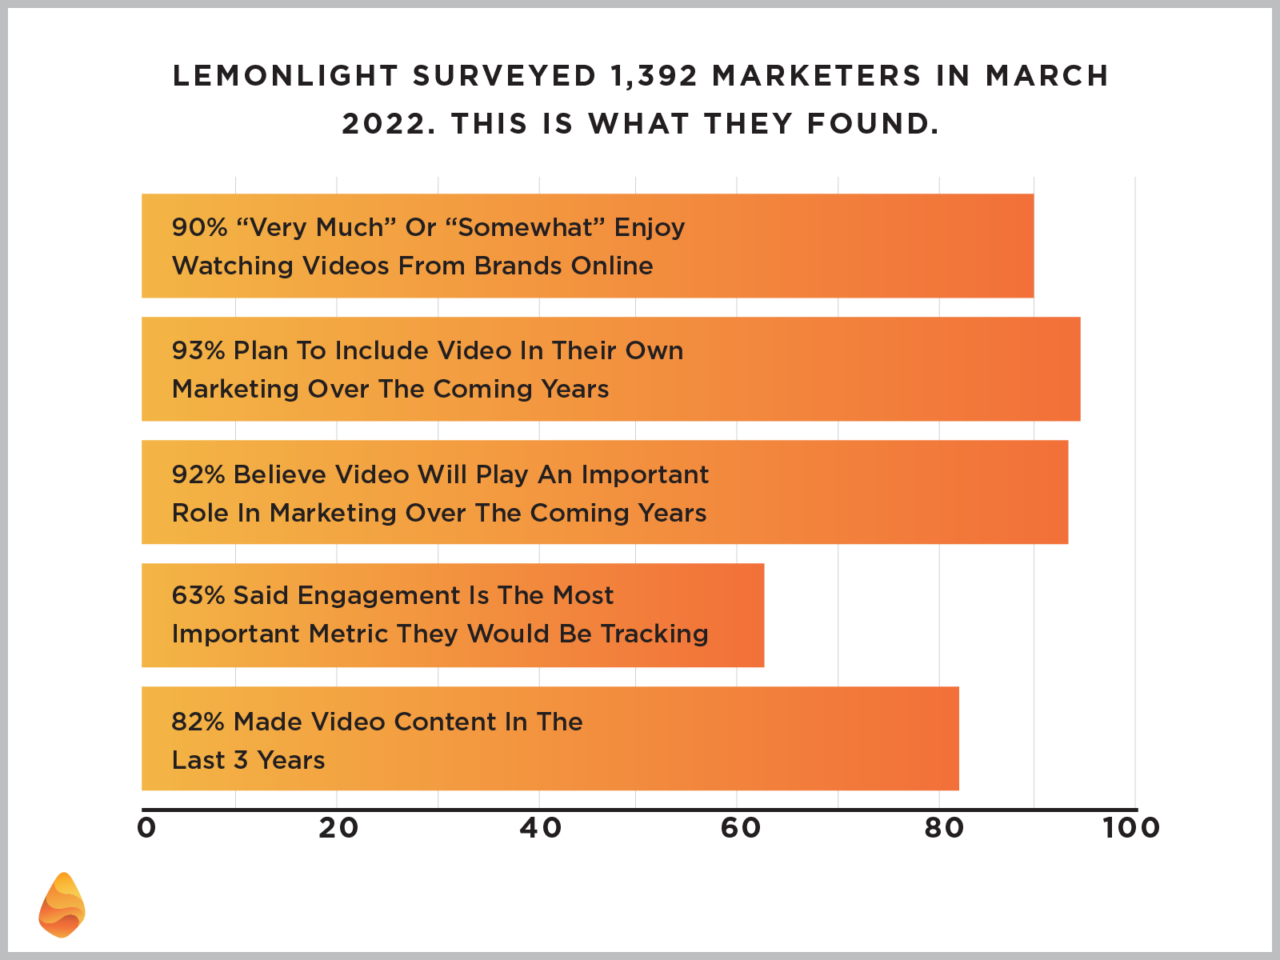 Graph showing that 90% of survey respondents very much enjoy watching brand videos online